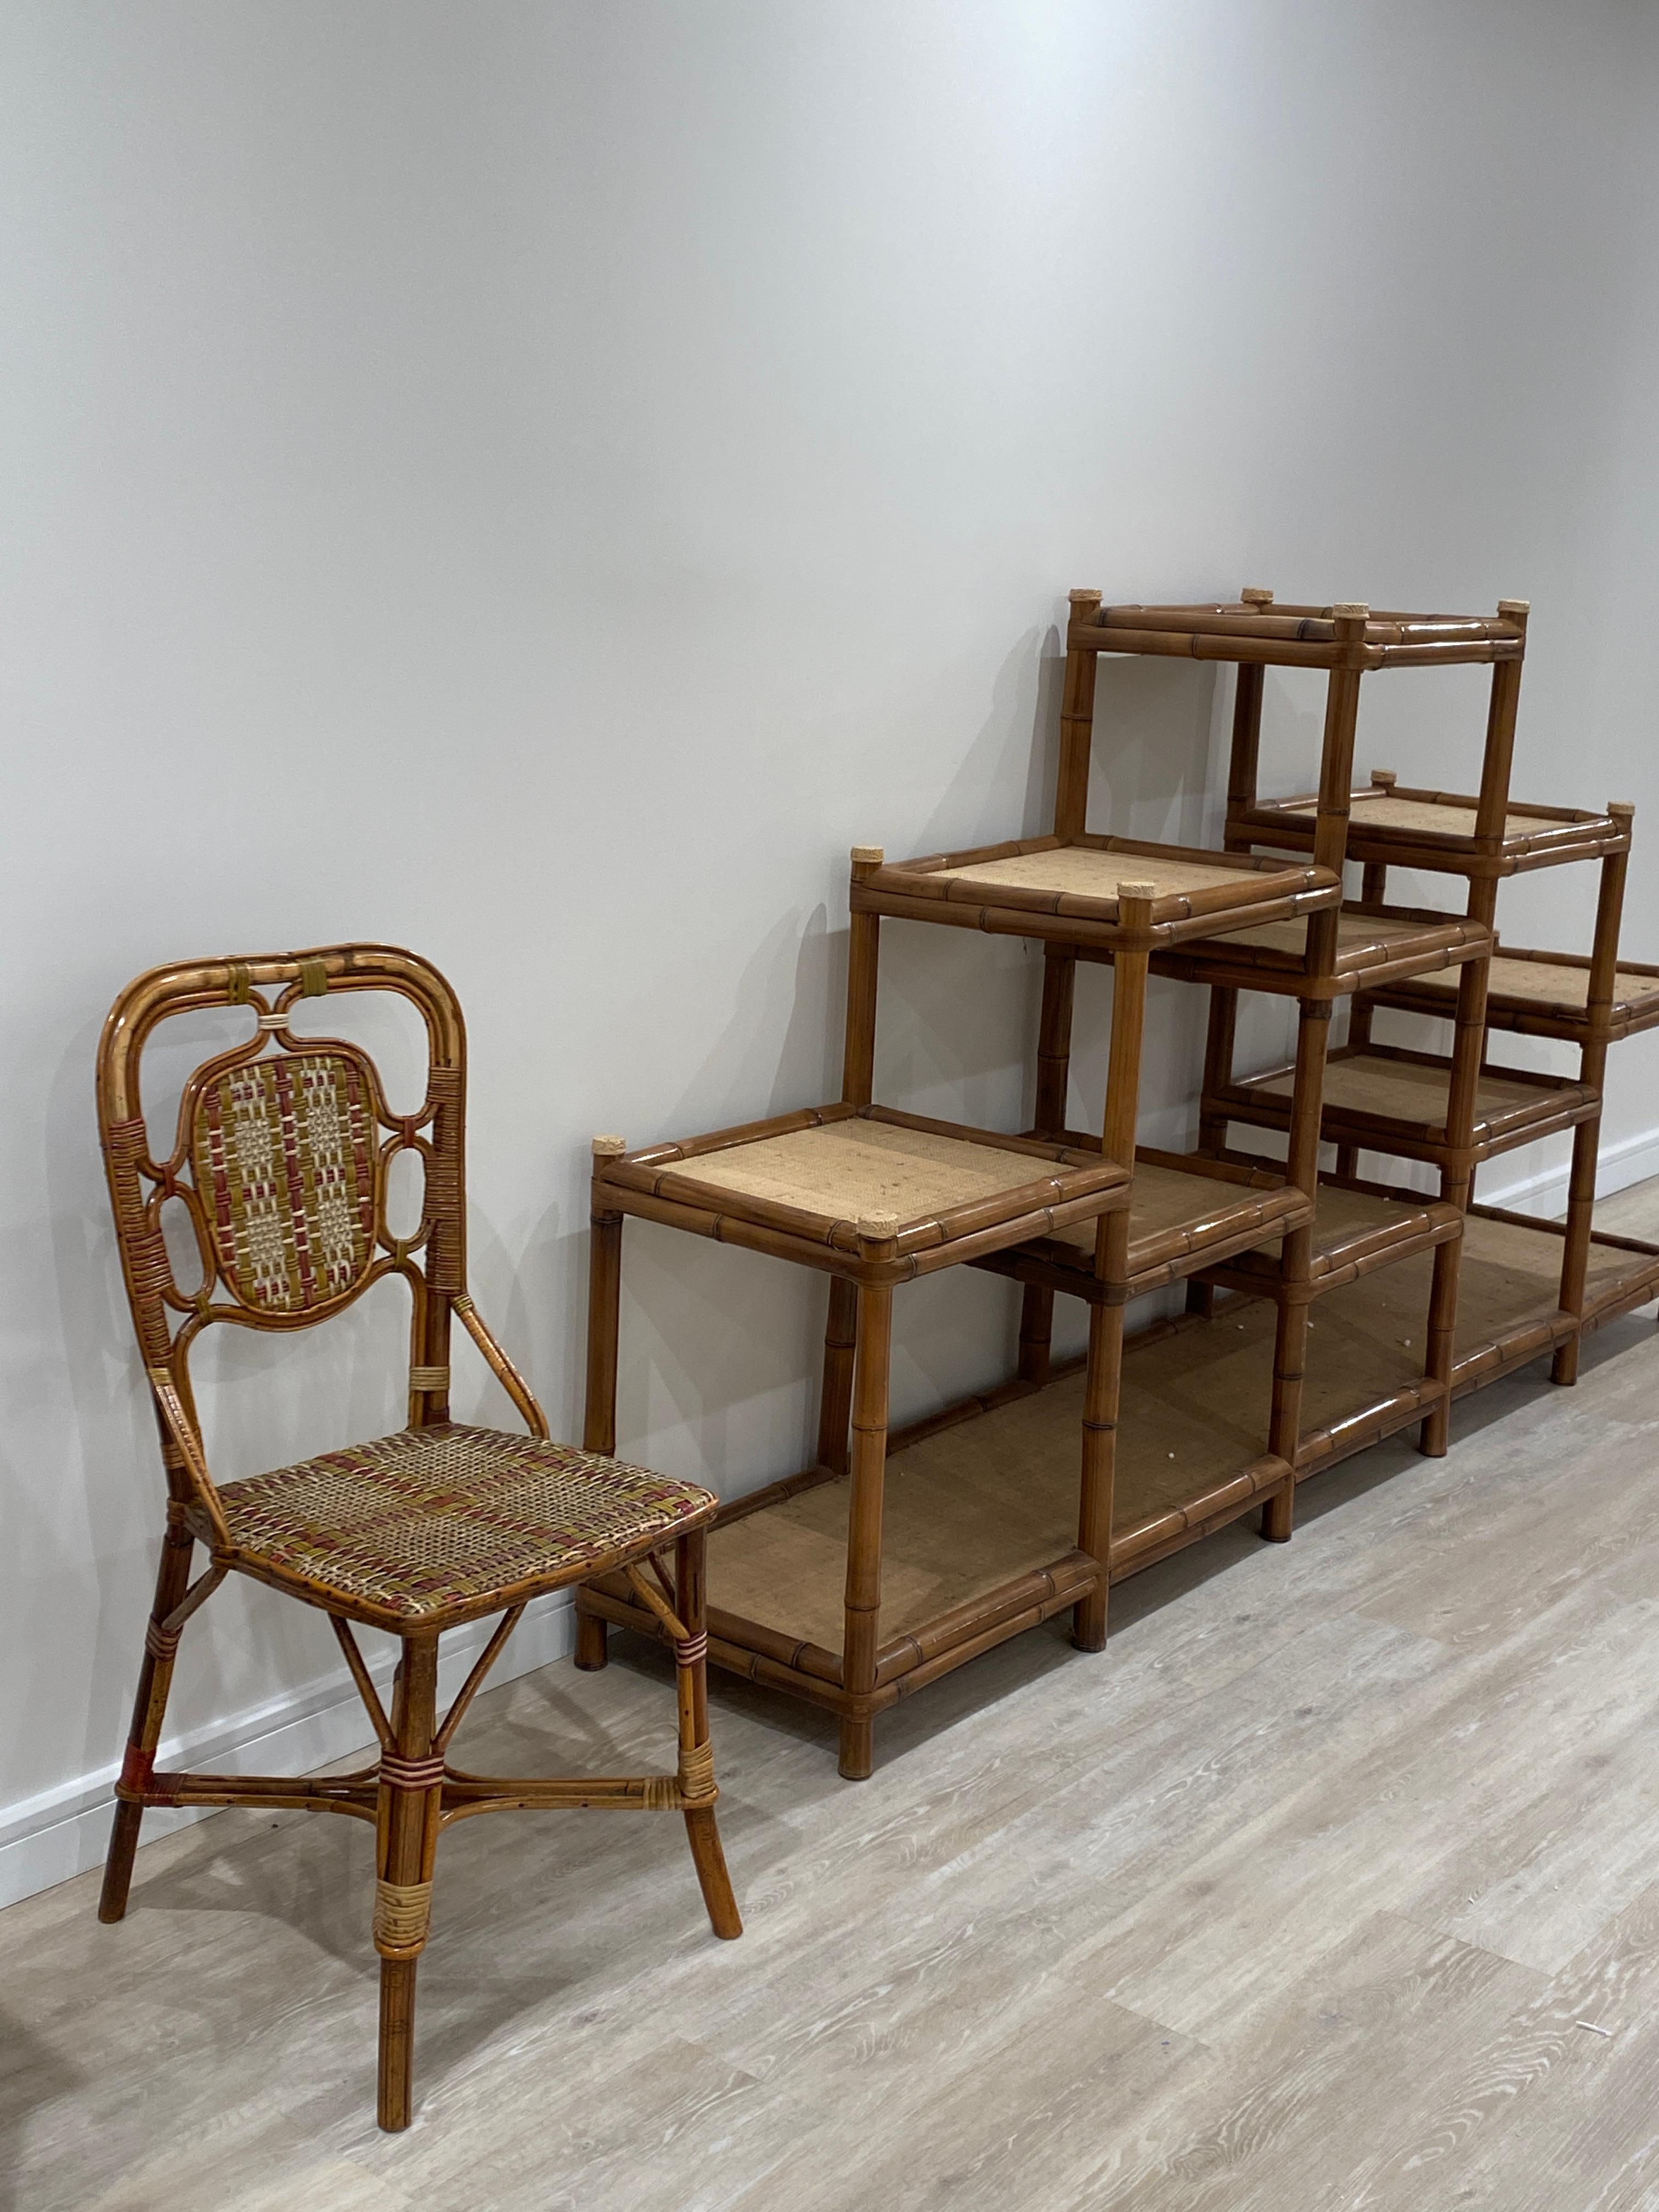 A pair of twentieth-century bamboo étagères, functional and elegant blending natural bamboo with timeless design. These pieces are perfect for displaying decor. 